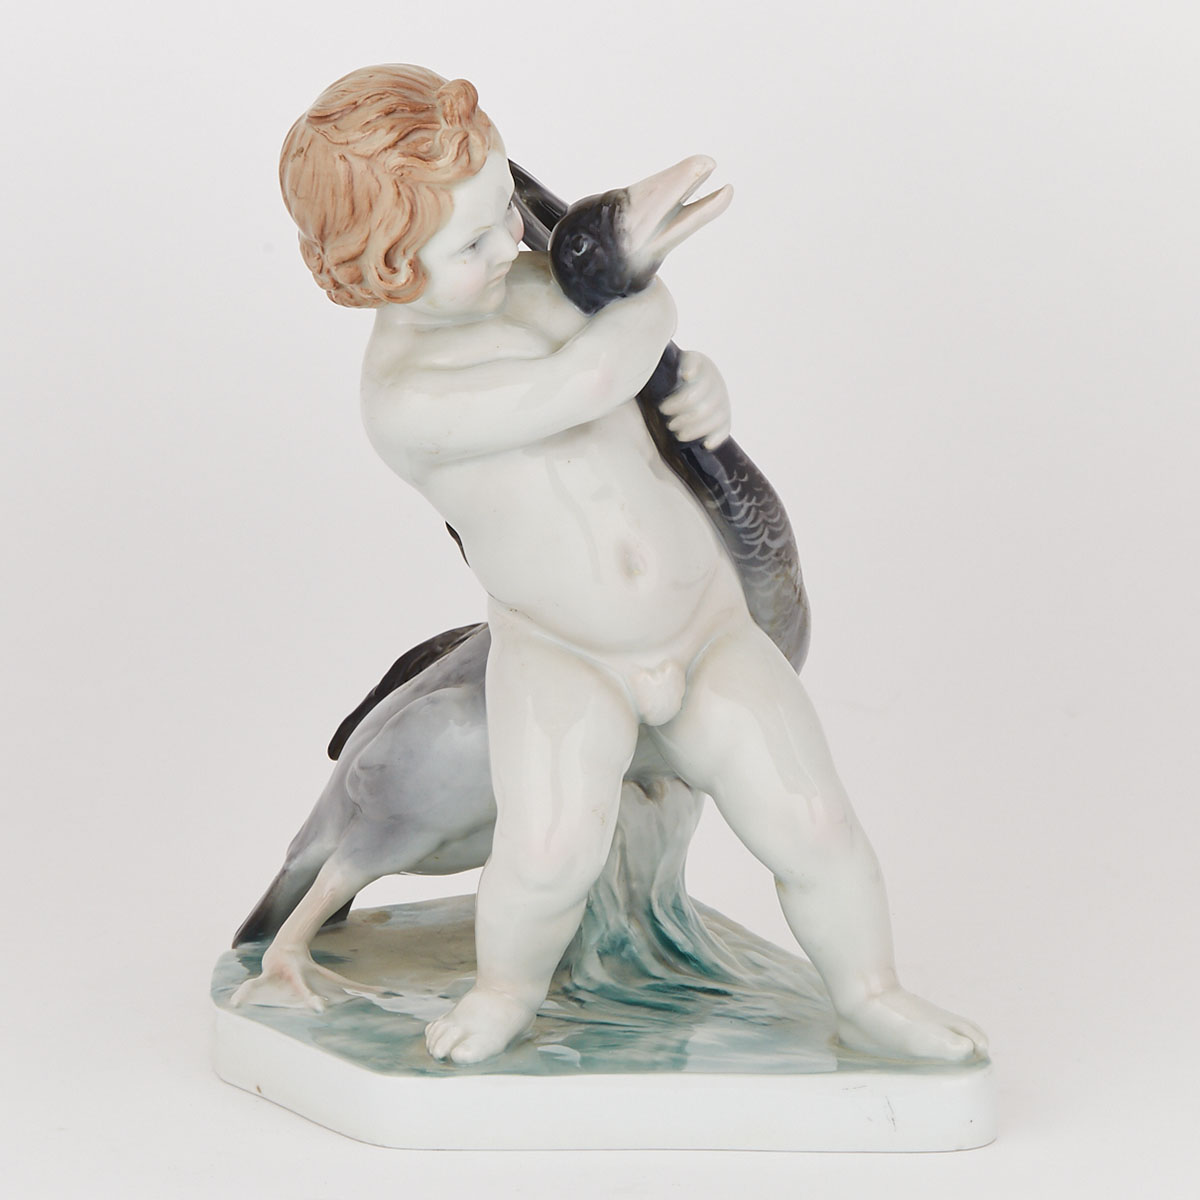 Carl Ens Figure Group of a Boy Wrestling a Goose, early 20th century